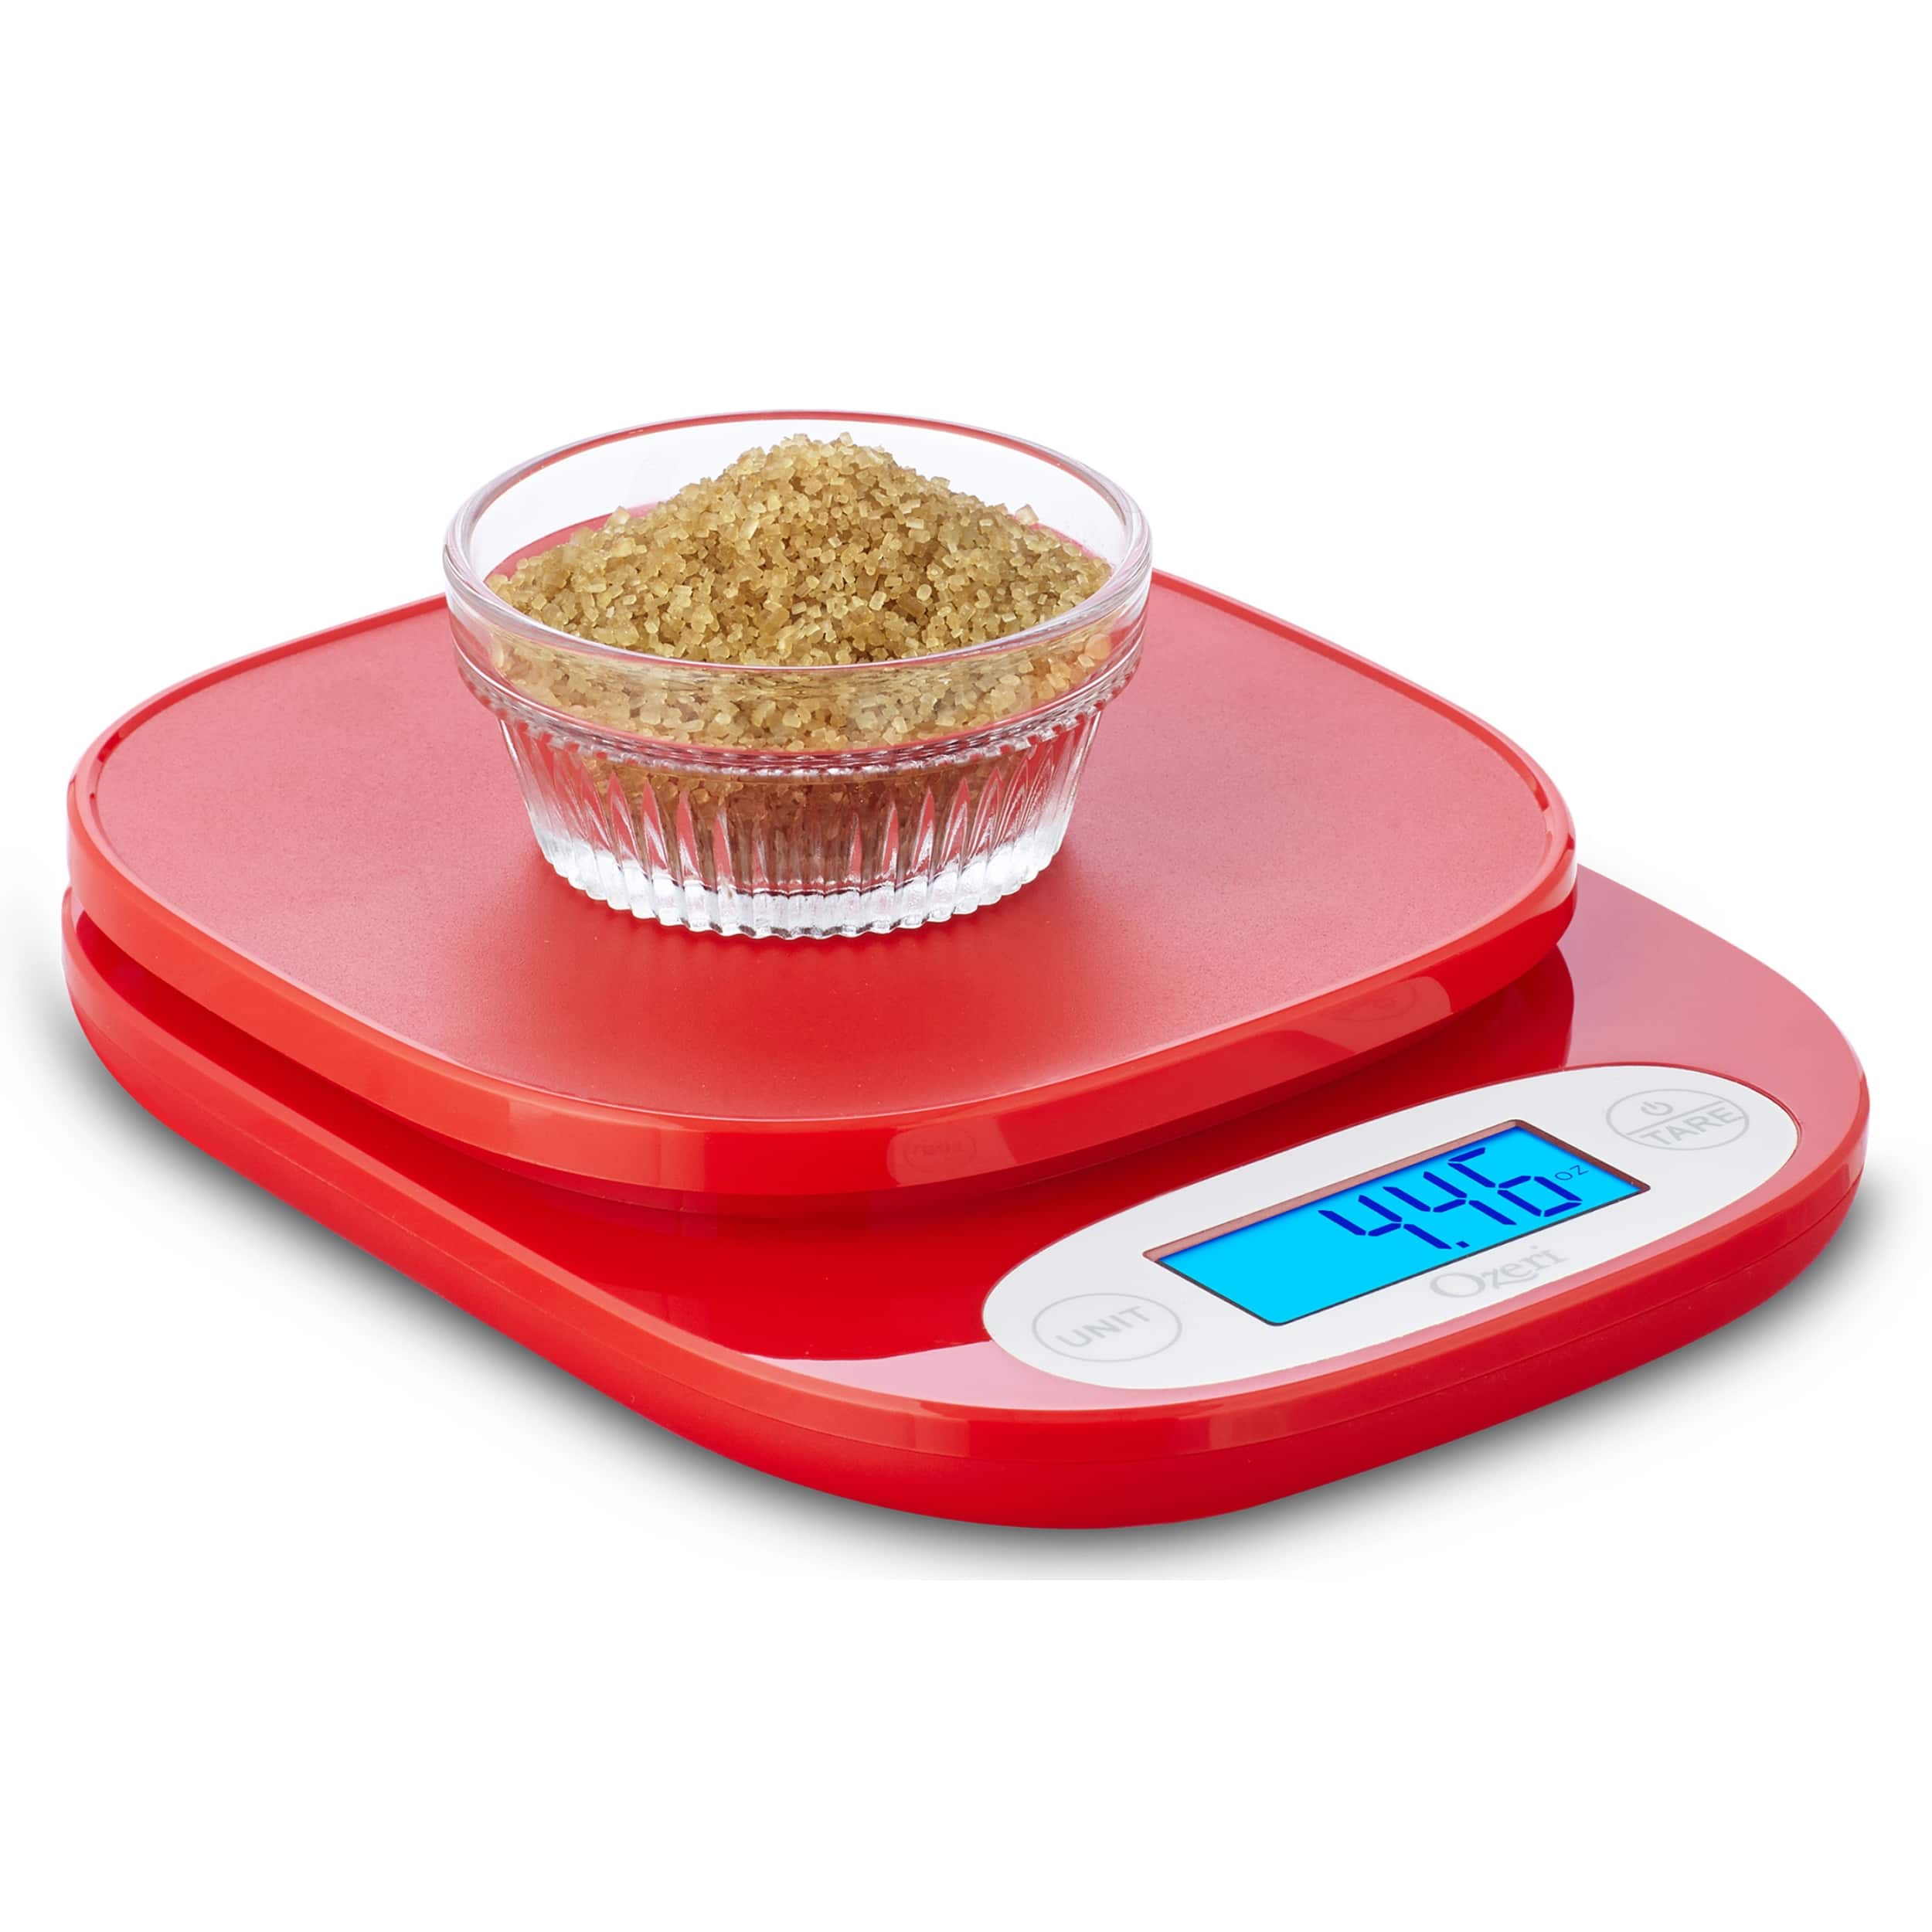 Ozeri ZK420 Garden and Kitchen Scale, with 0.5 G (0.01 oz) Precision Weighing Technology, White